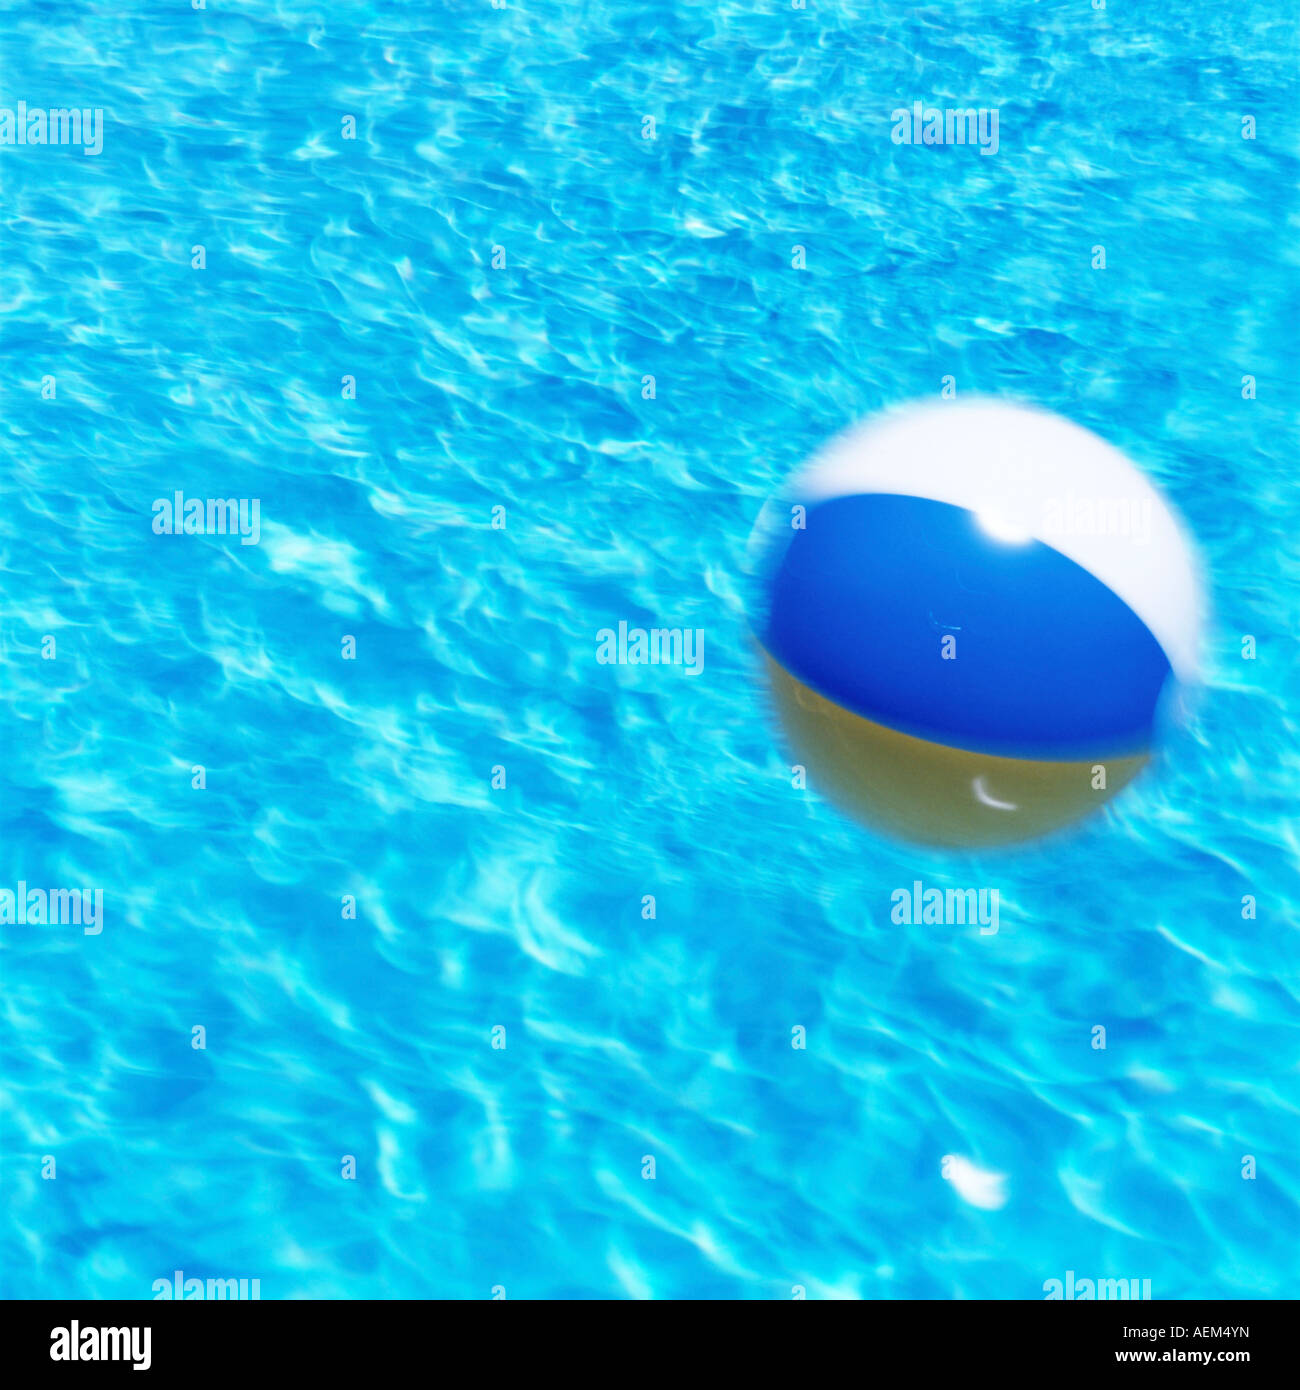 beach ball being blown across a swimming pool Stock Photo